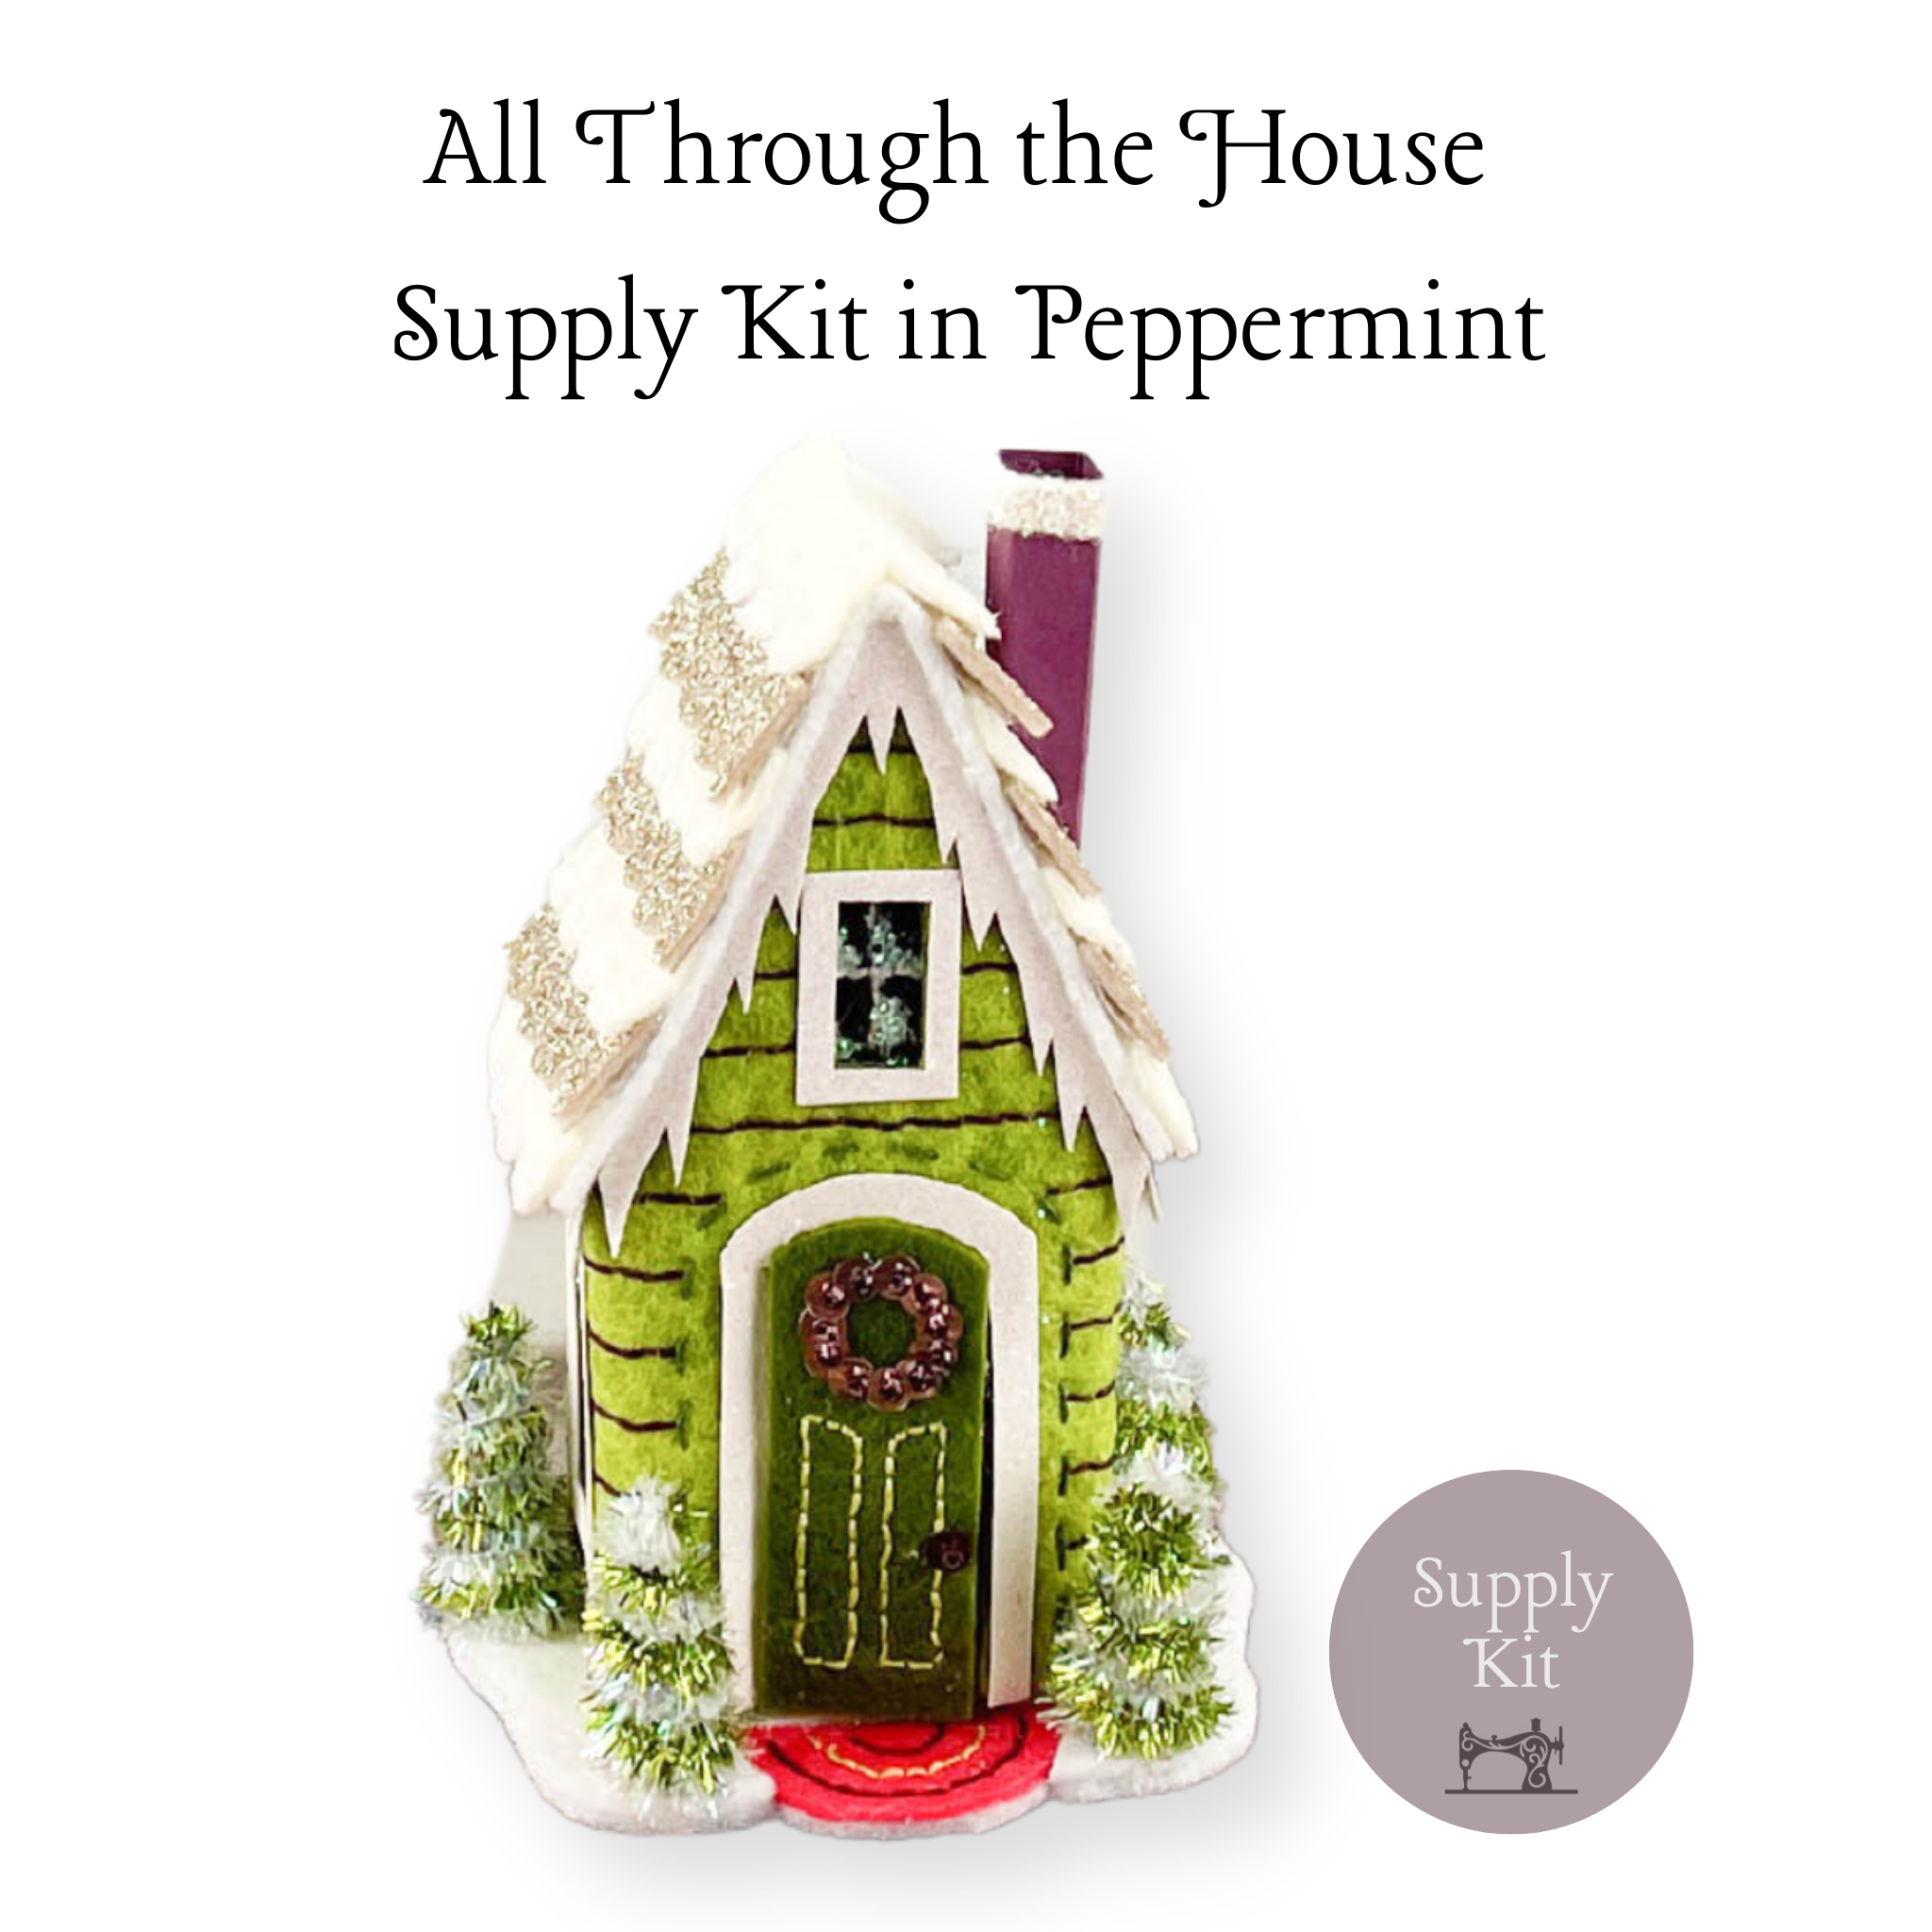 All Through the House Peppermint